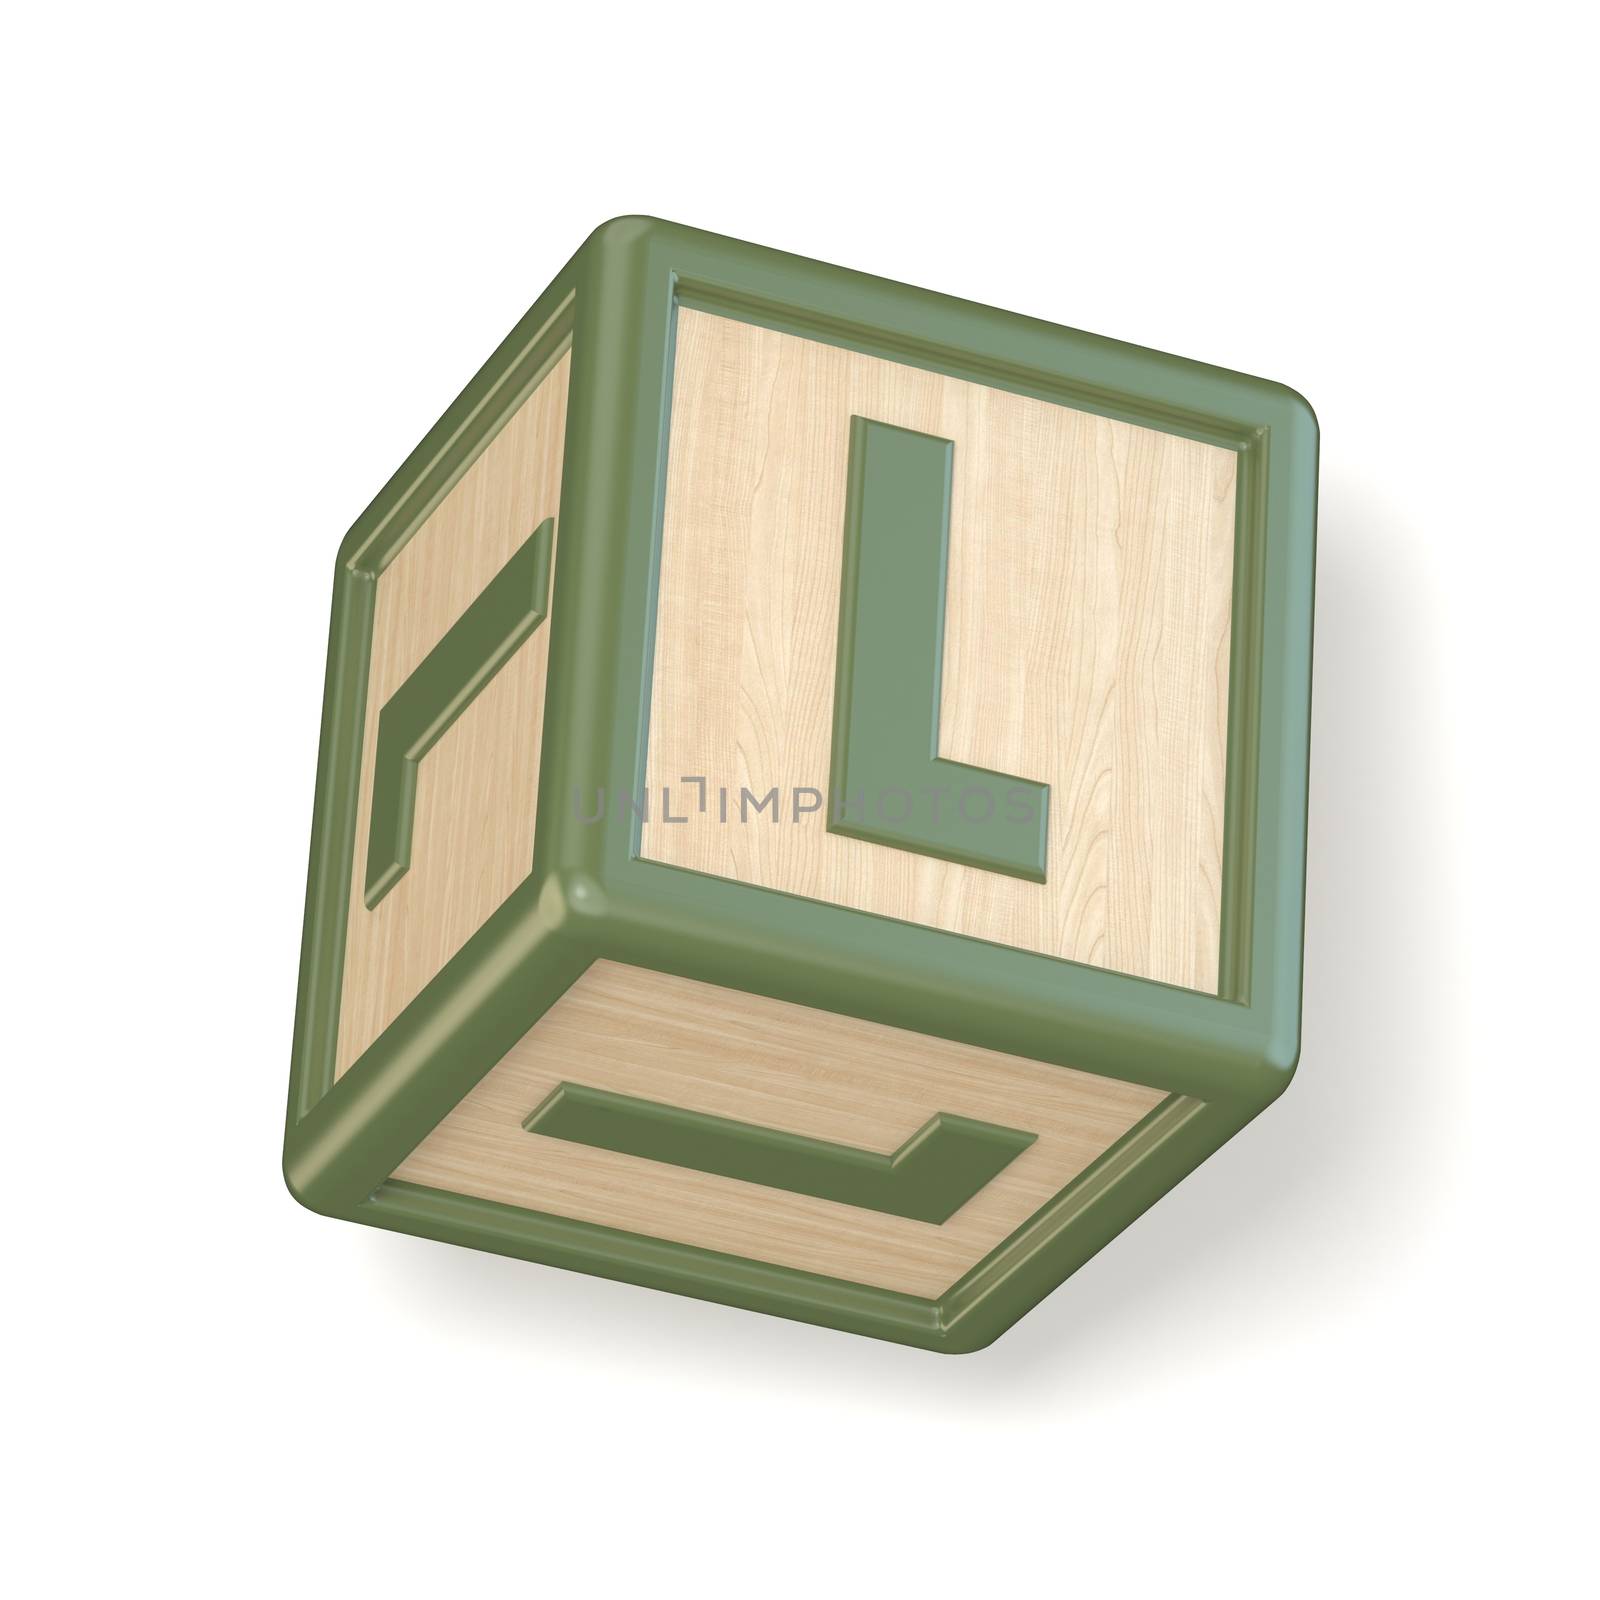 Letter L wooden alphabet blocks font rotated. 3D by djmilic